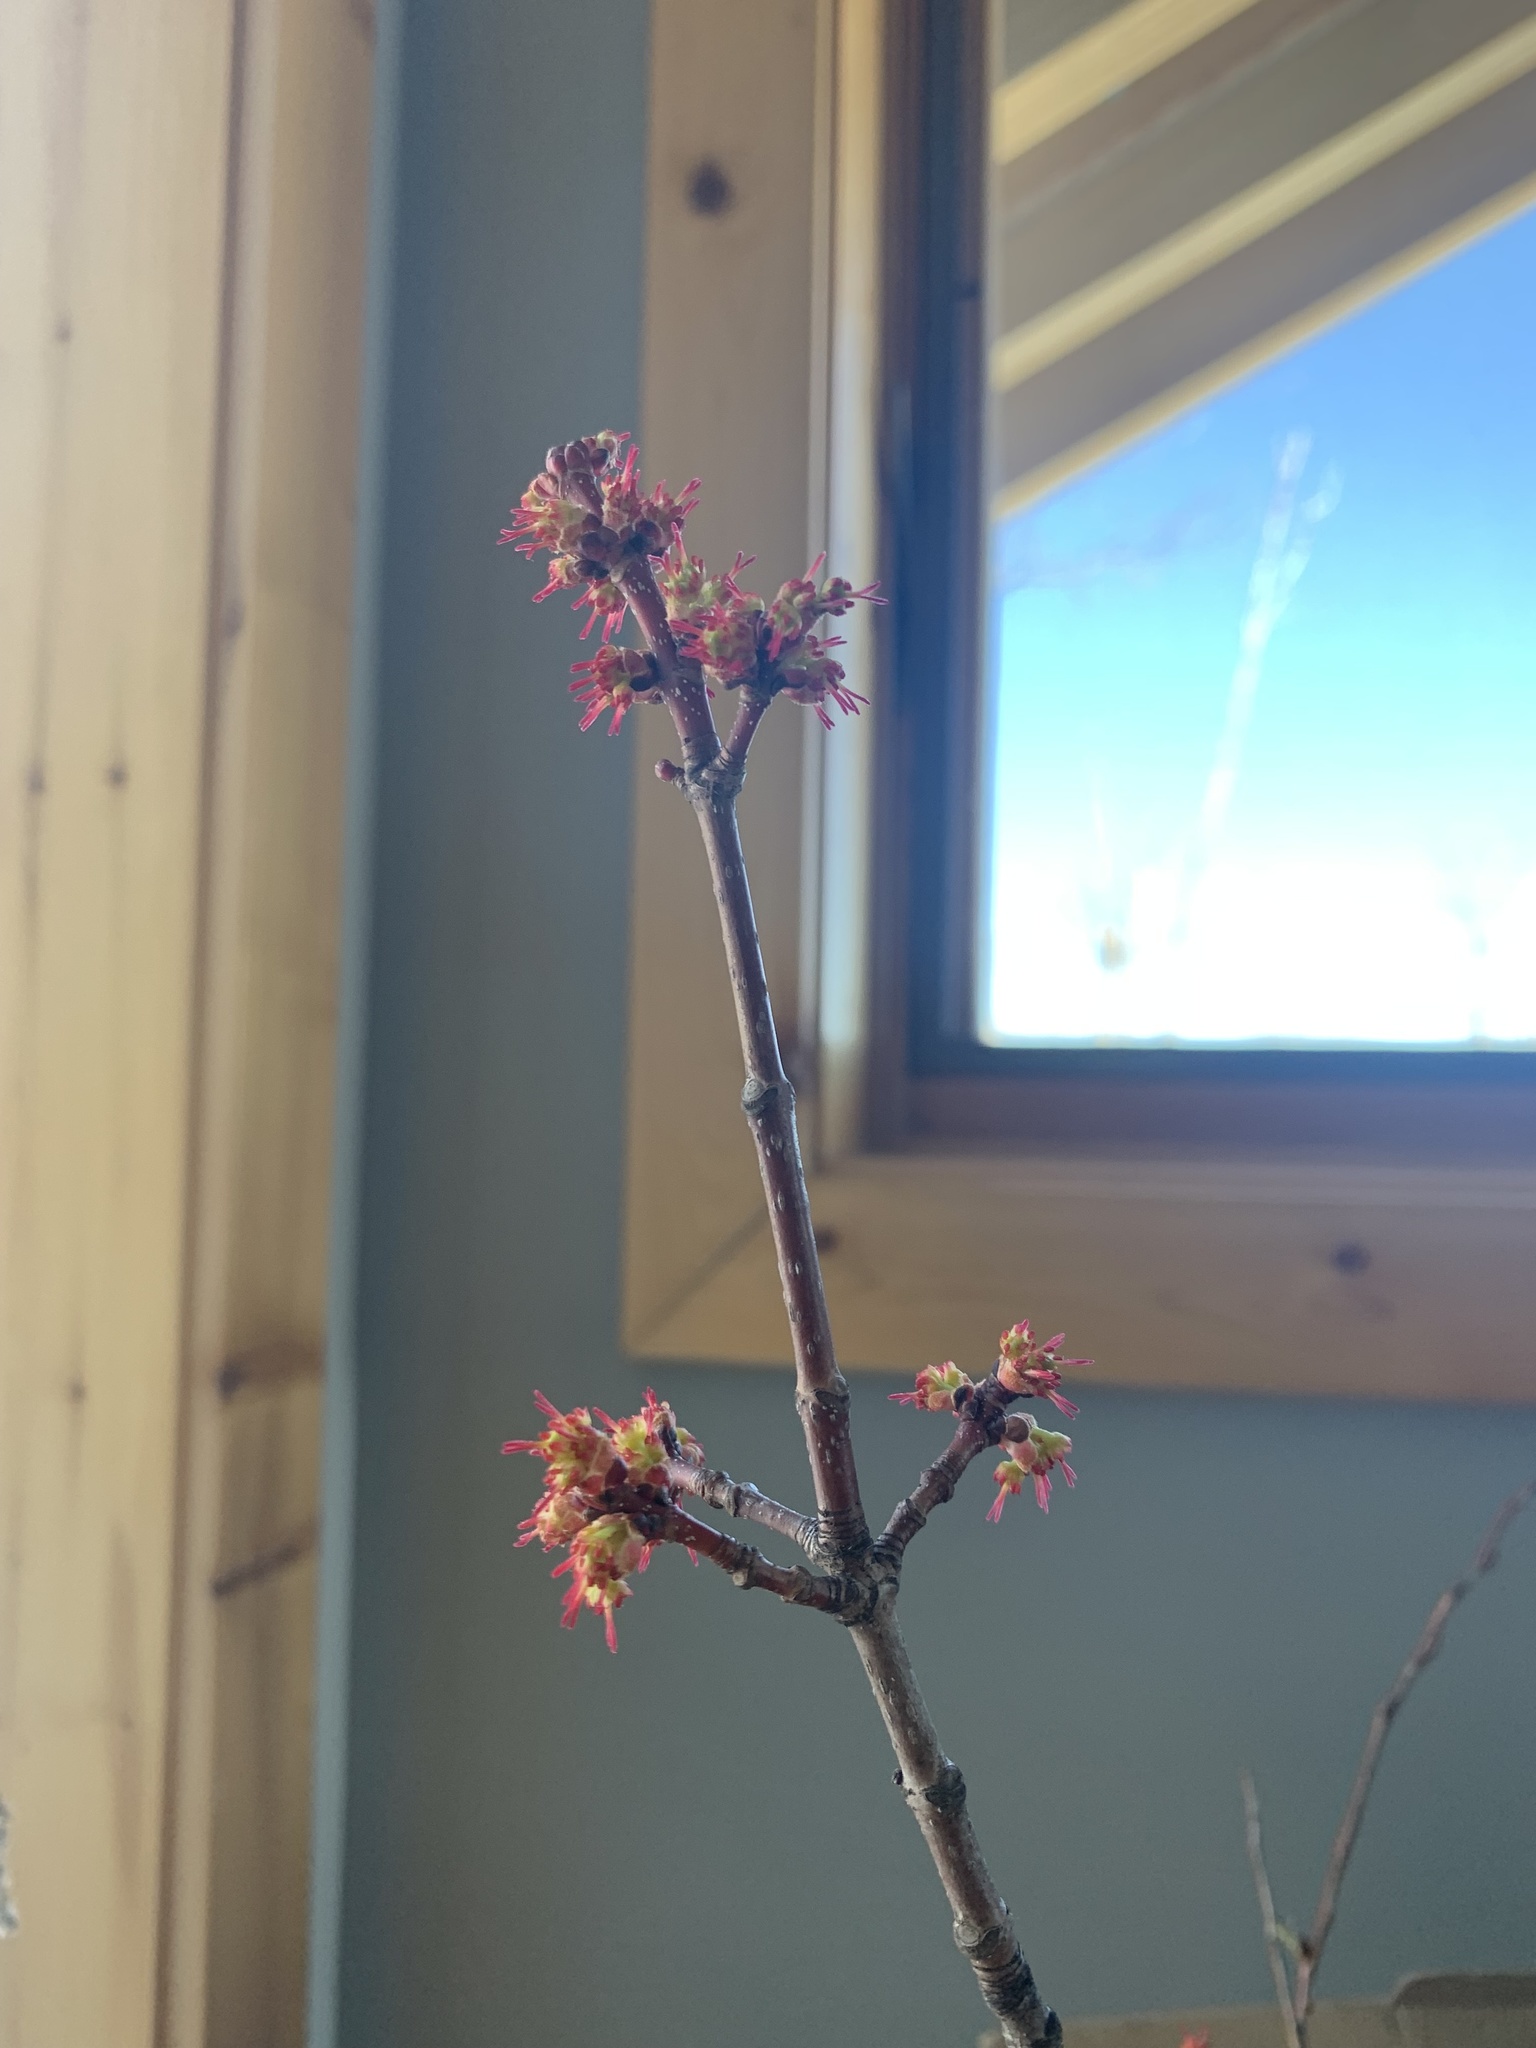 In the interior of someone's home, a twig with flower buds is growing